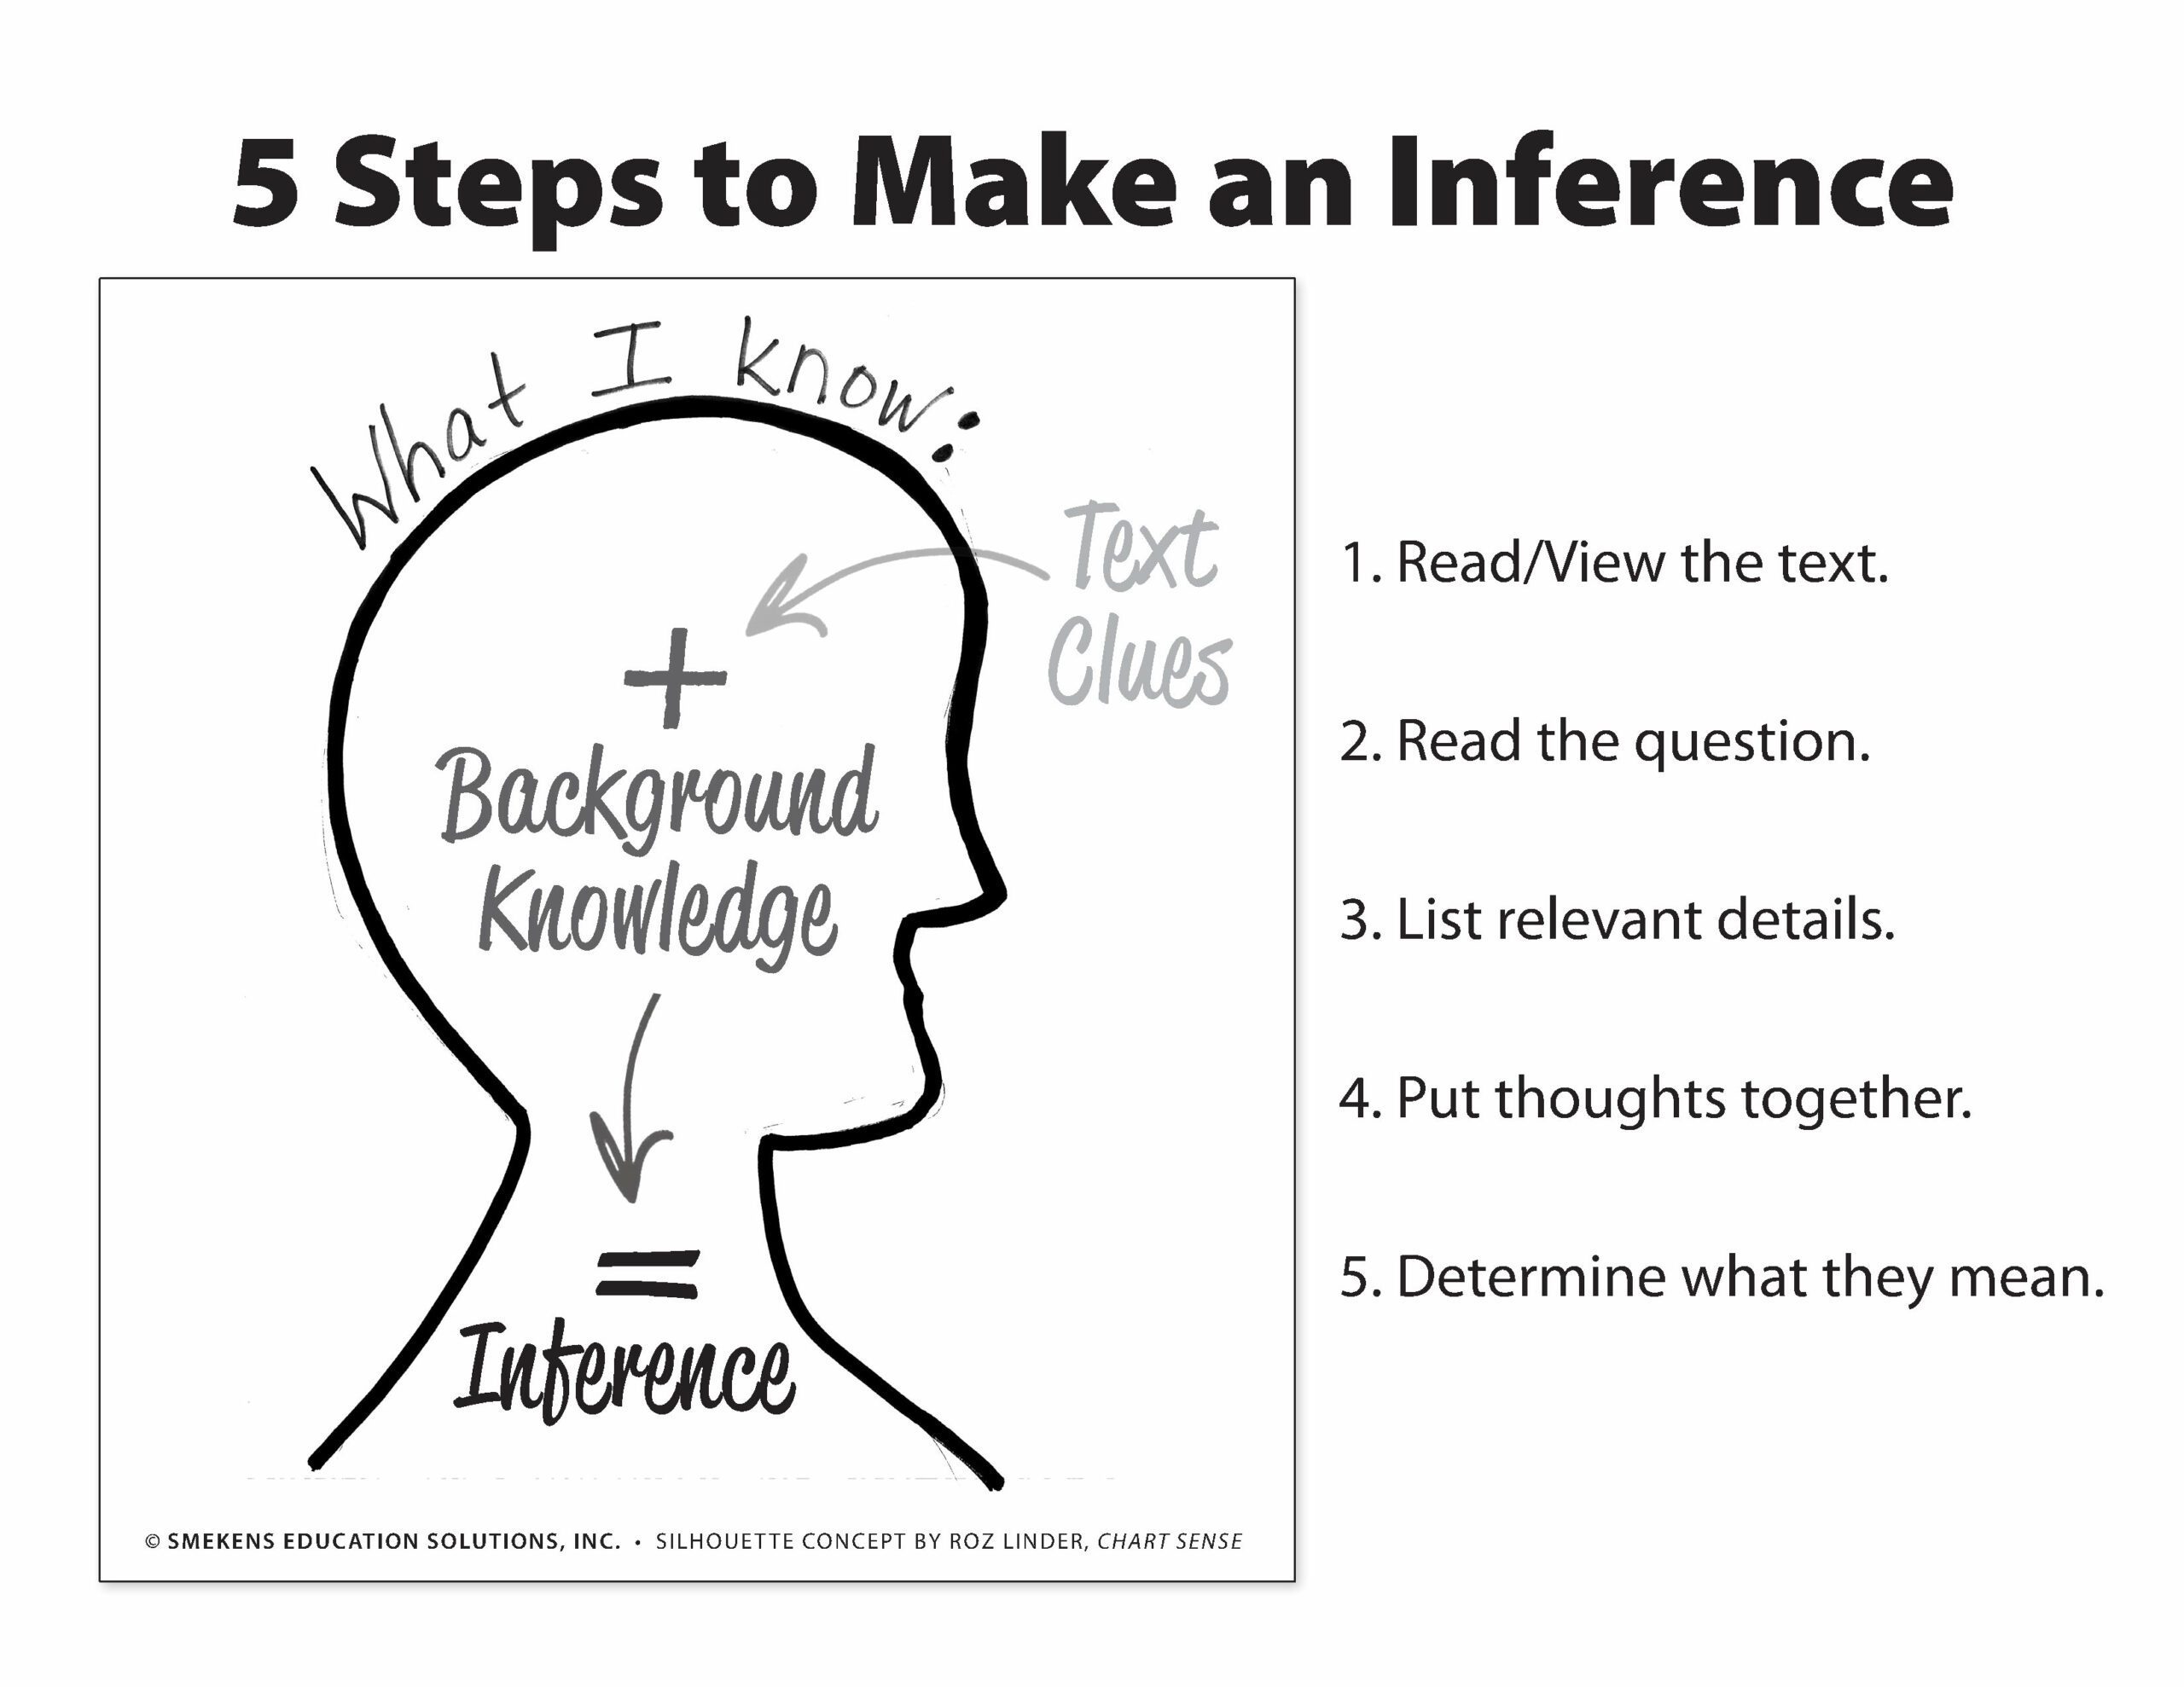 5-Step Process to Make an Inference